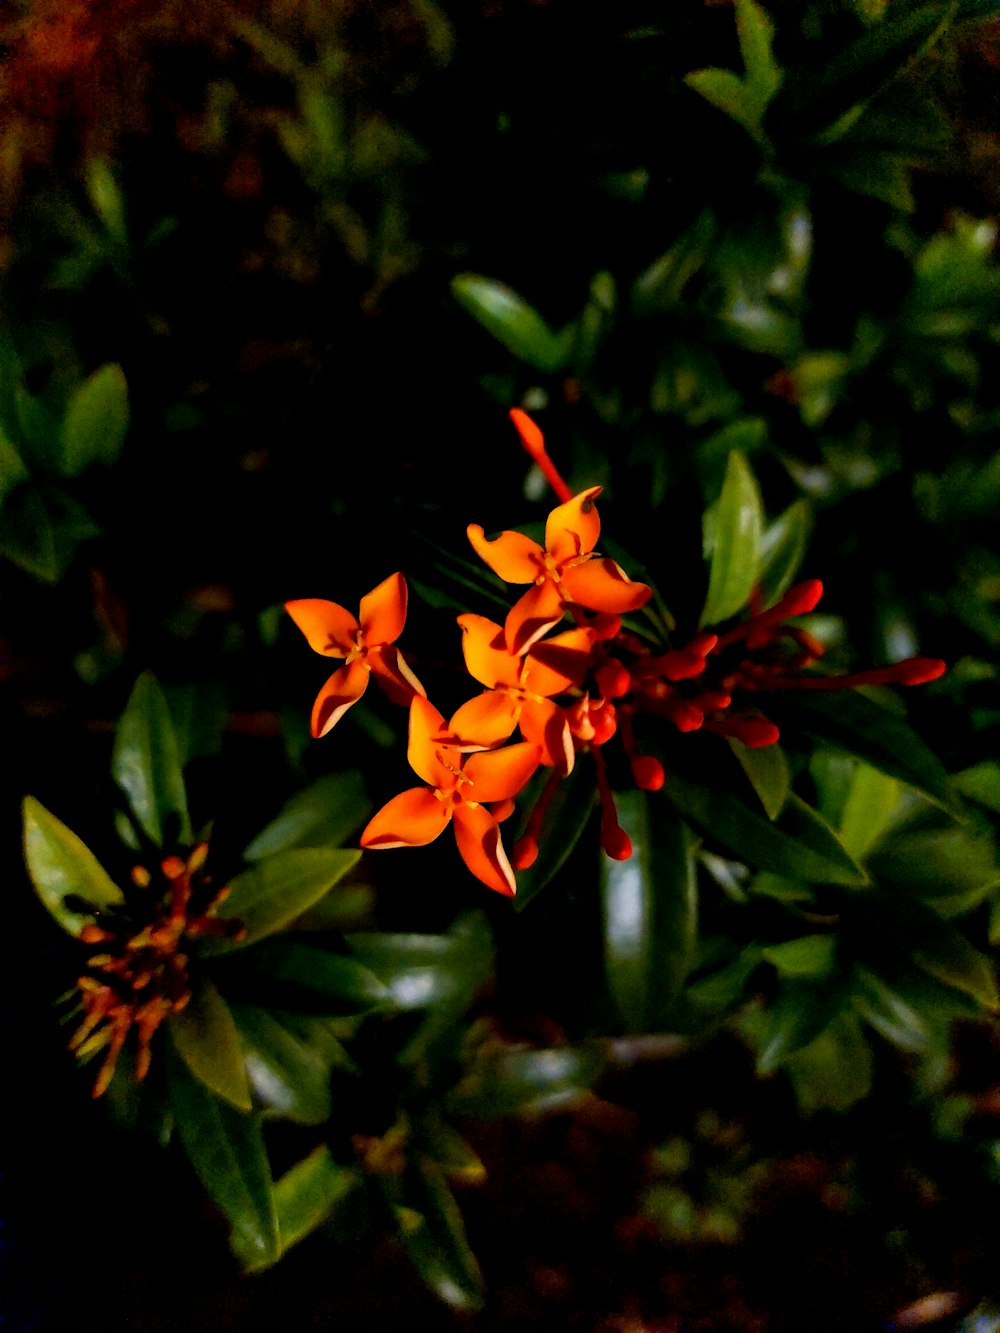 a close up of an orange flower on a plant